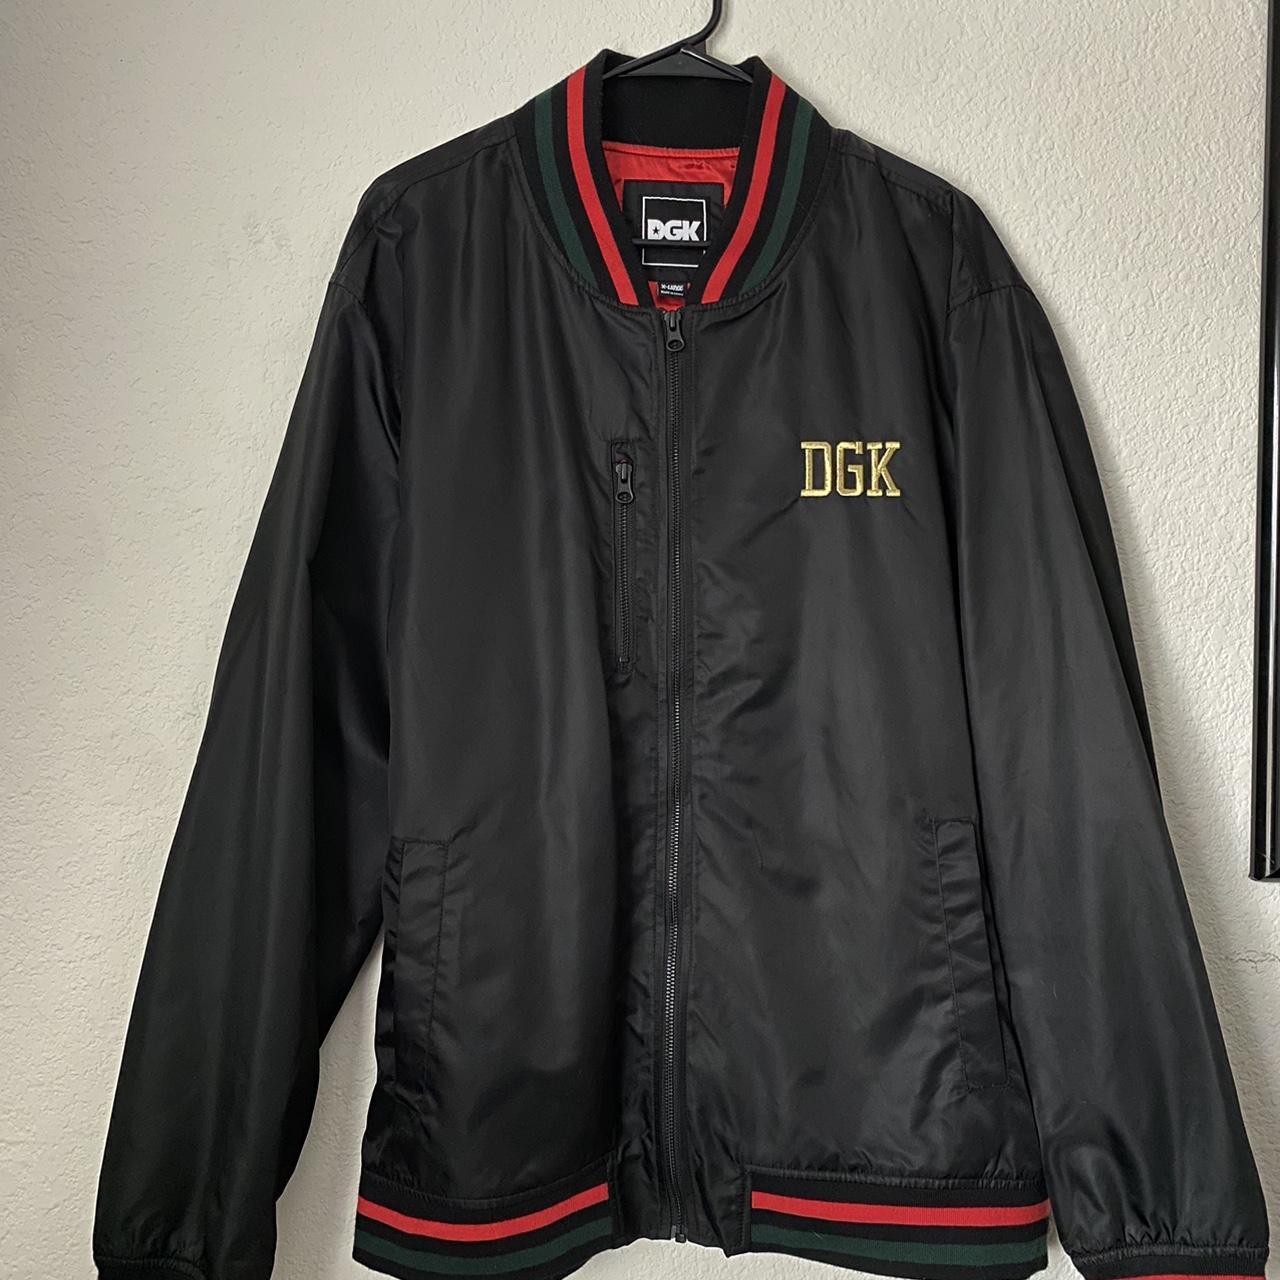 DGK jacket only wore once with 3 pockets - Depop